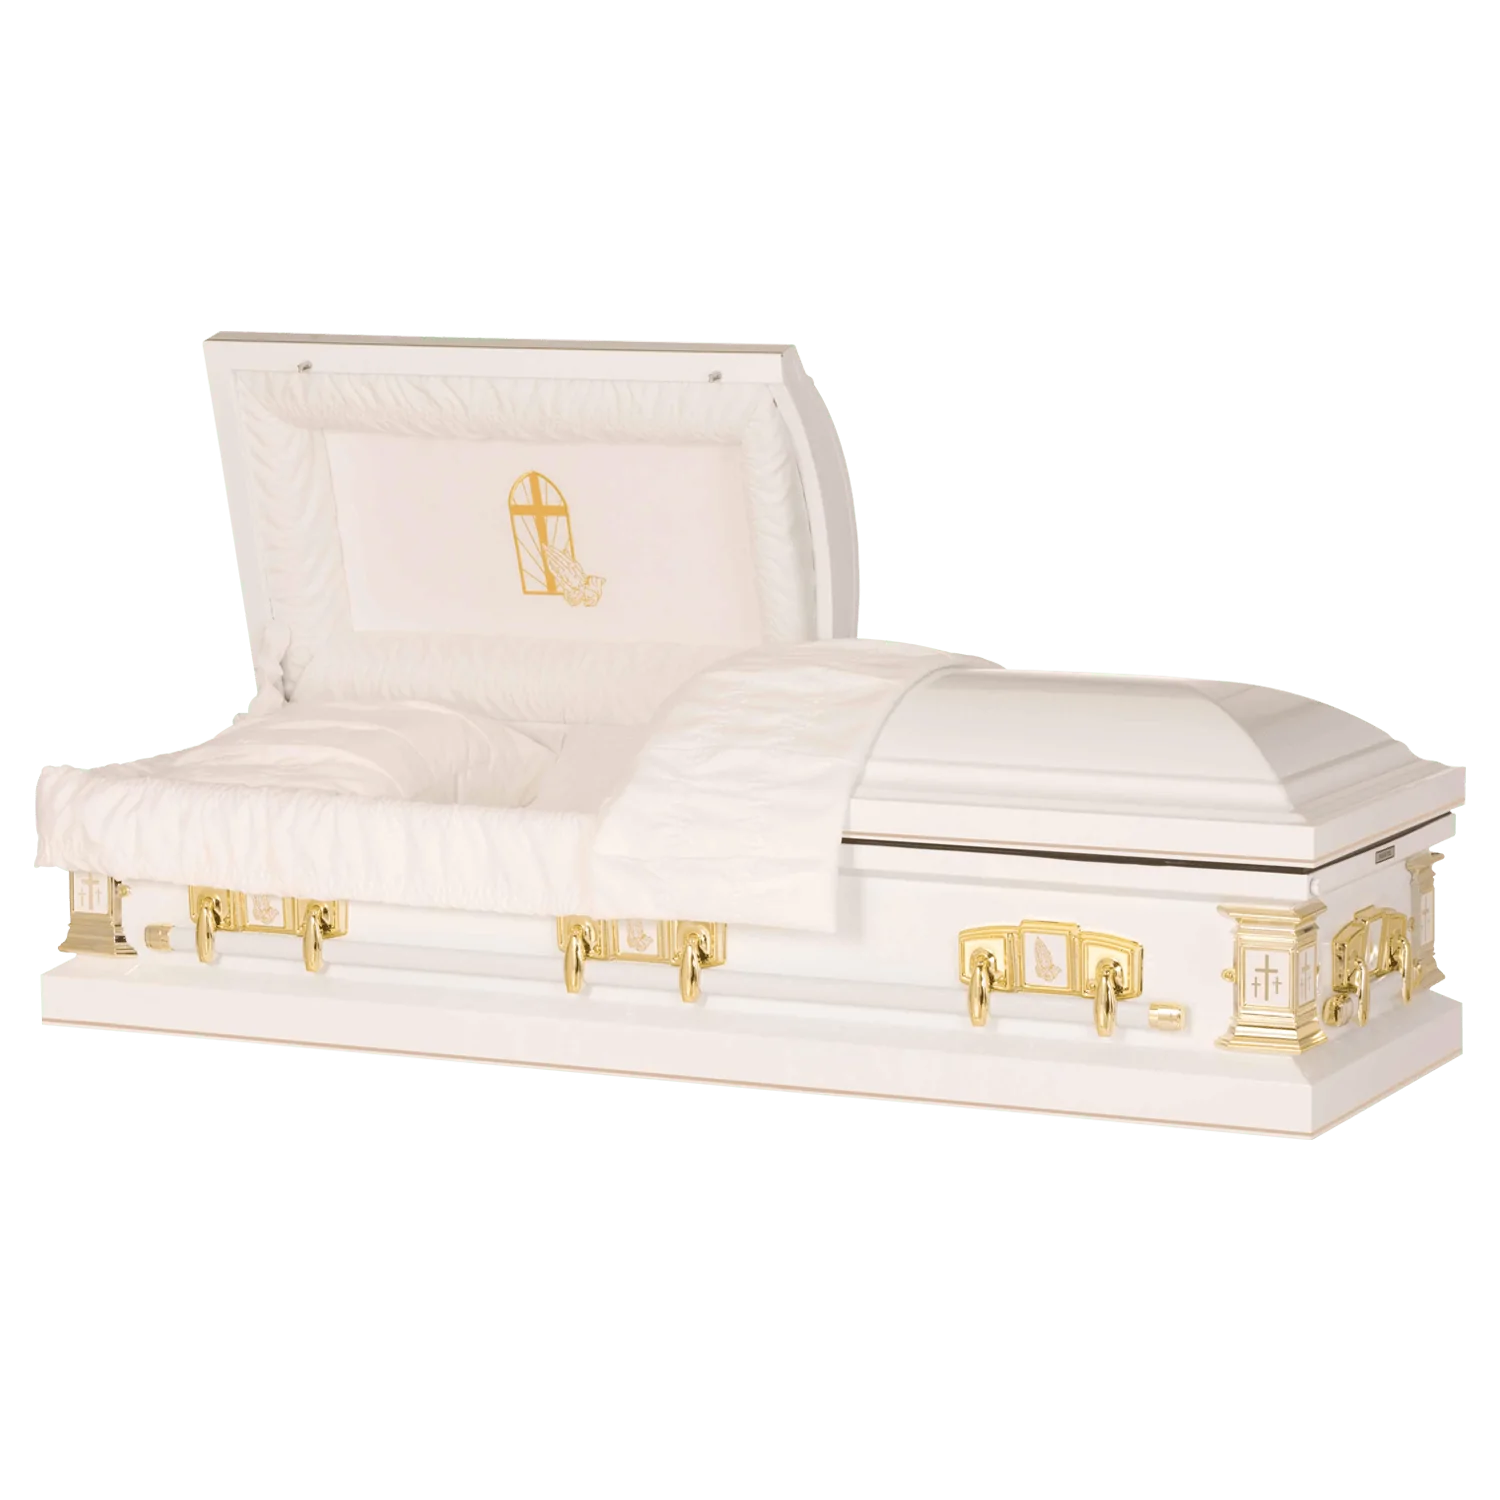 When and how to buy a religious casket?